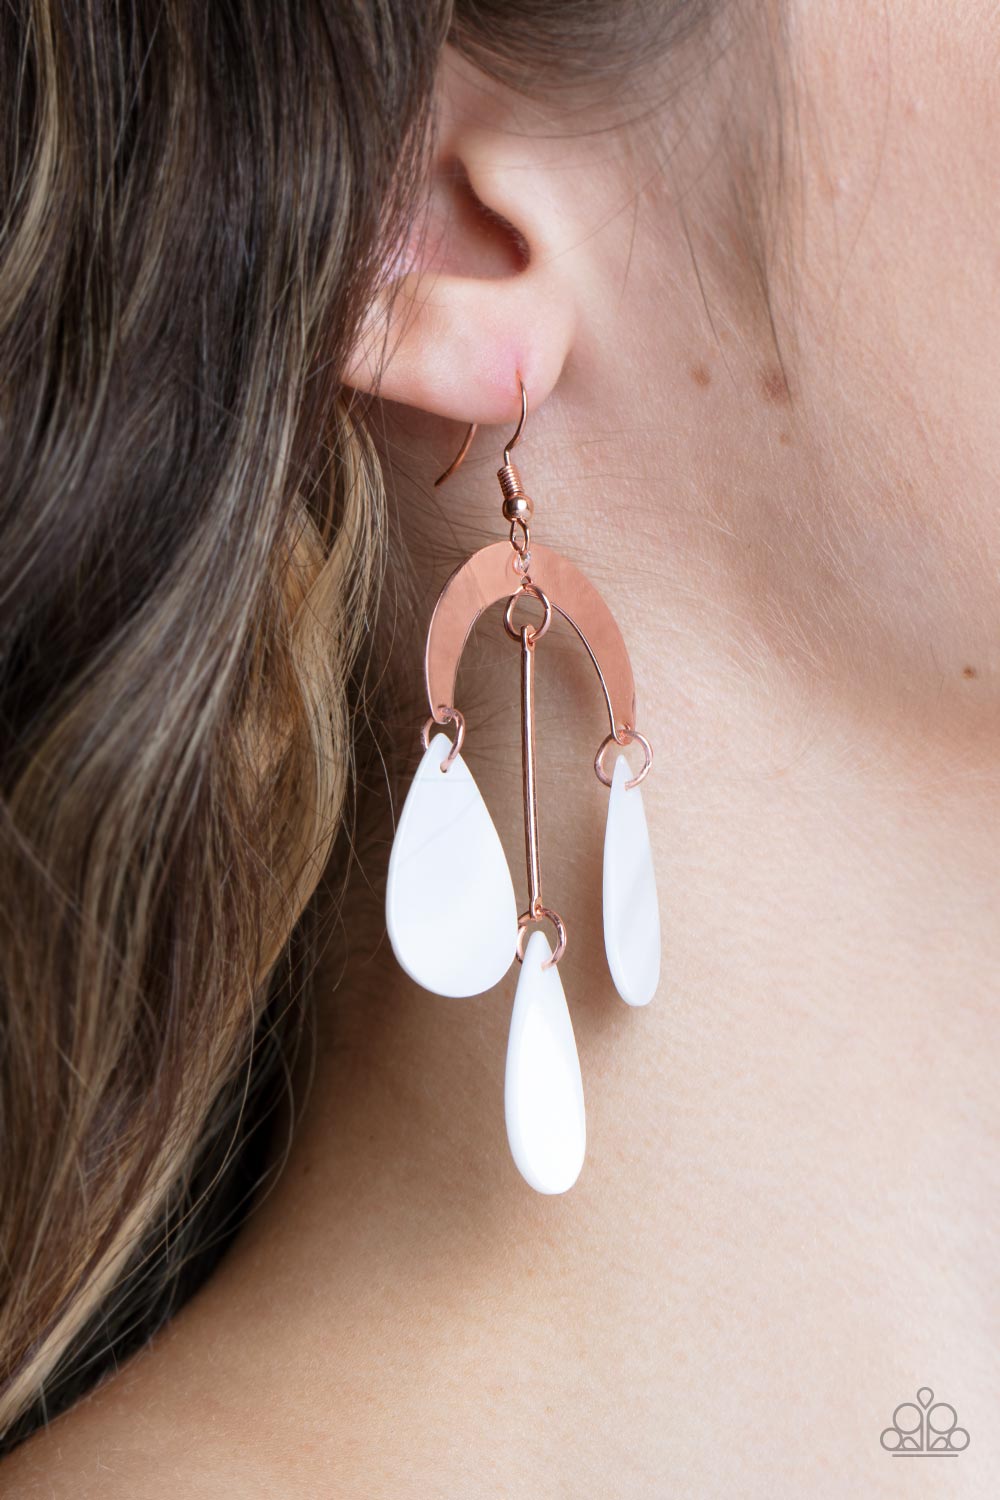 Atlantis Ambience - Copper Earrings - Paparazzi Accessories